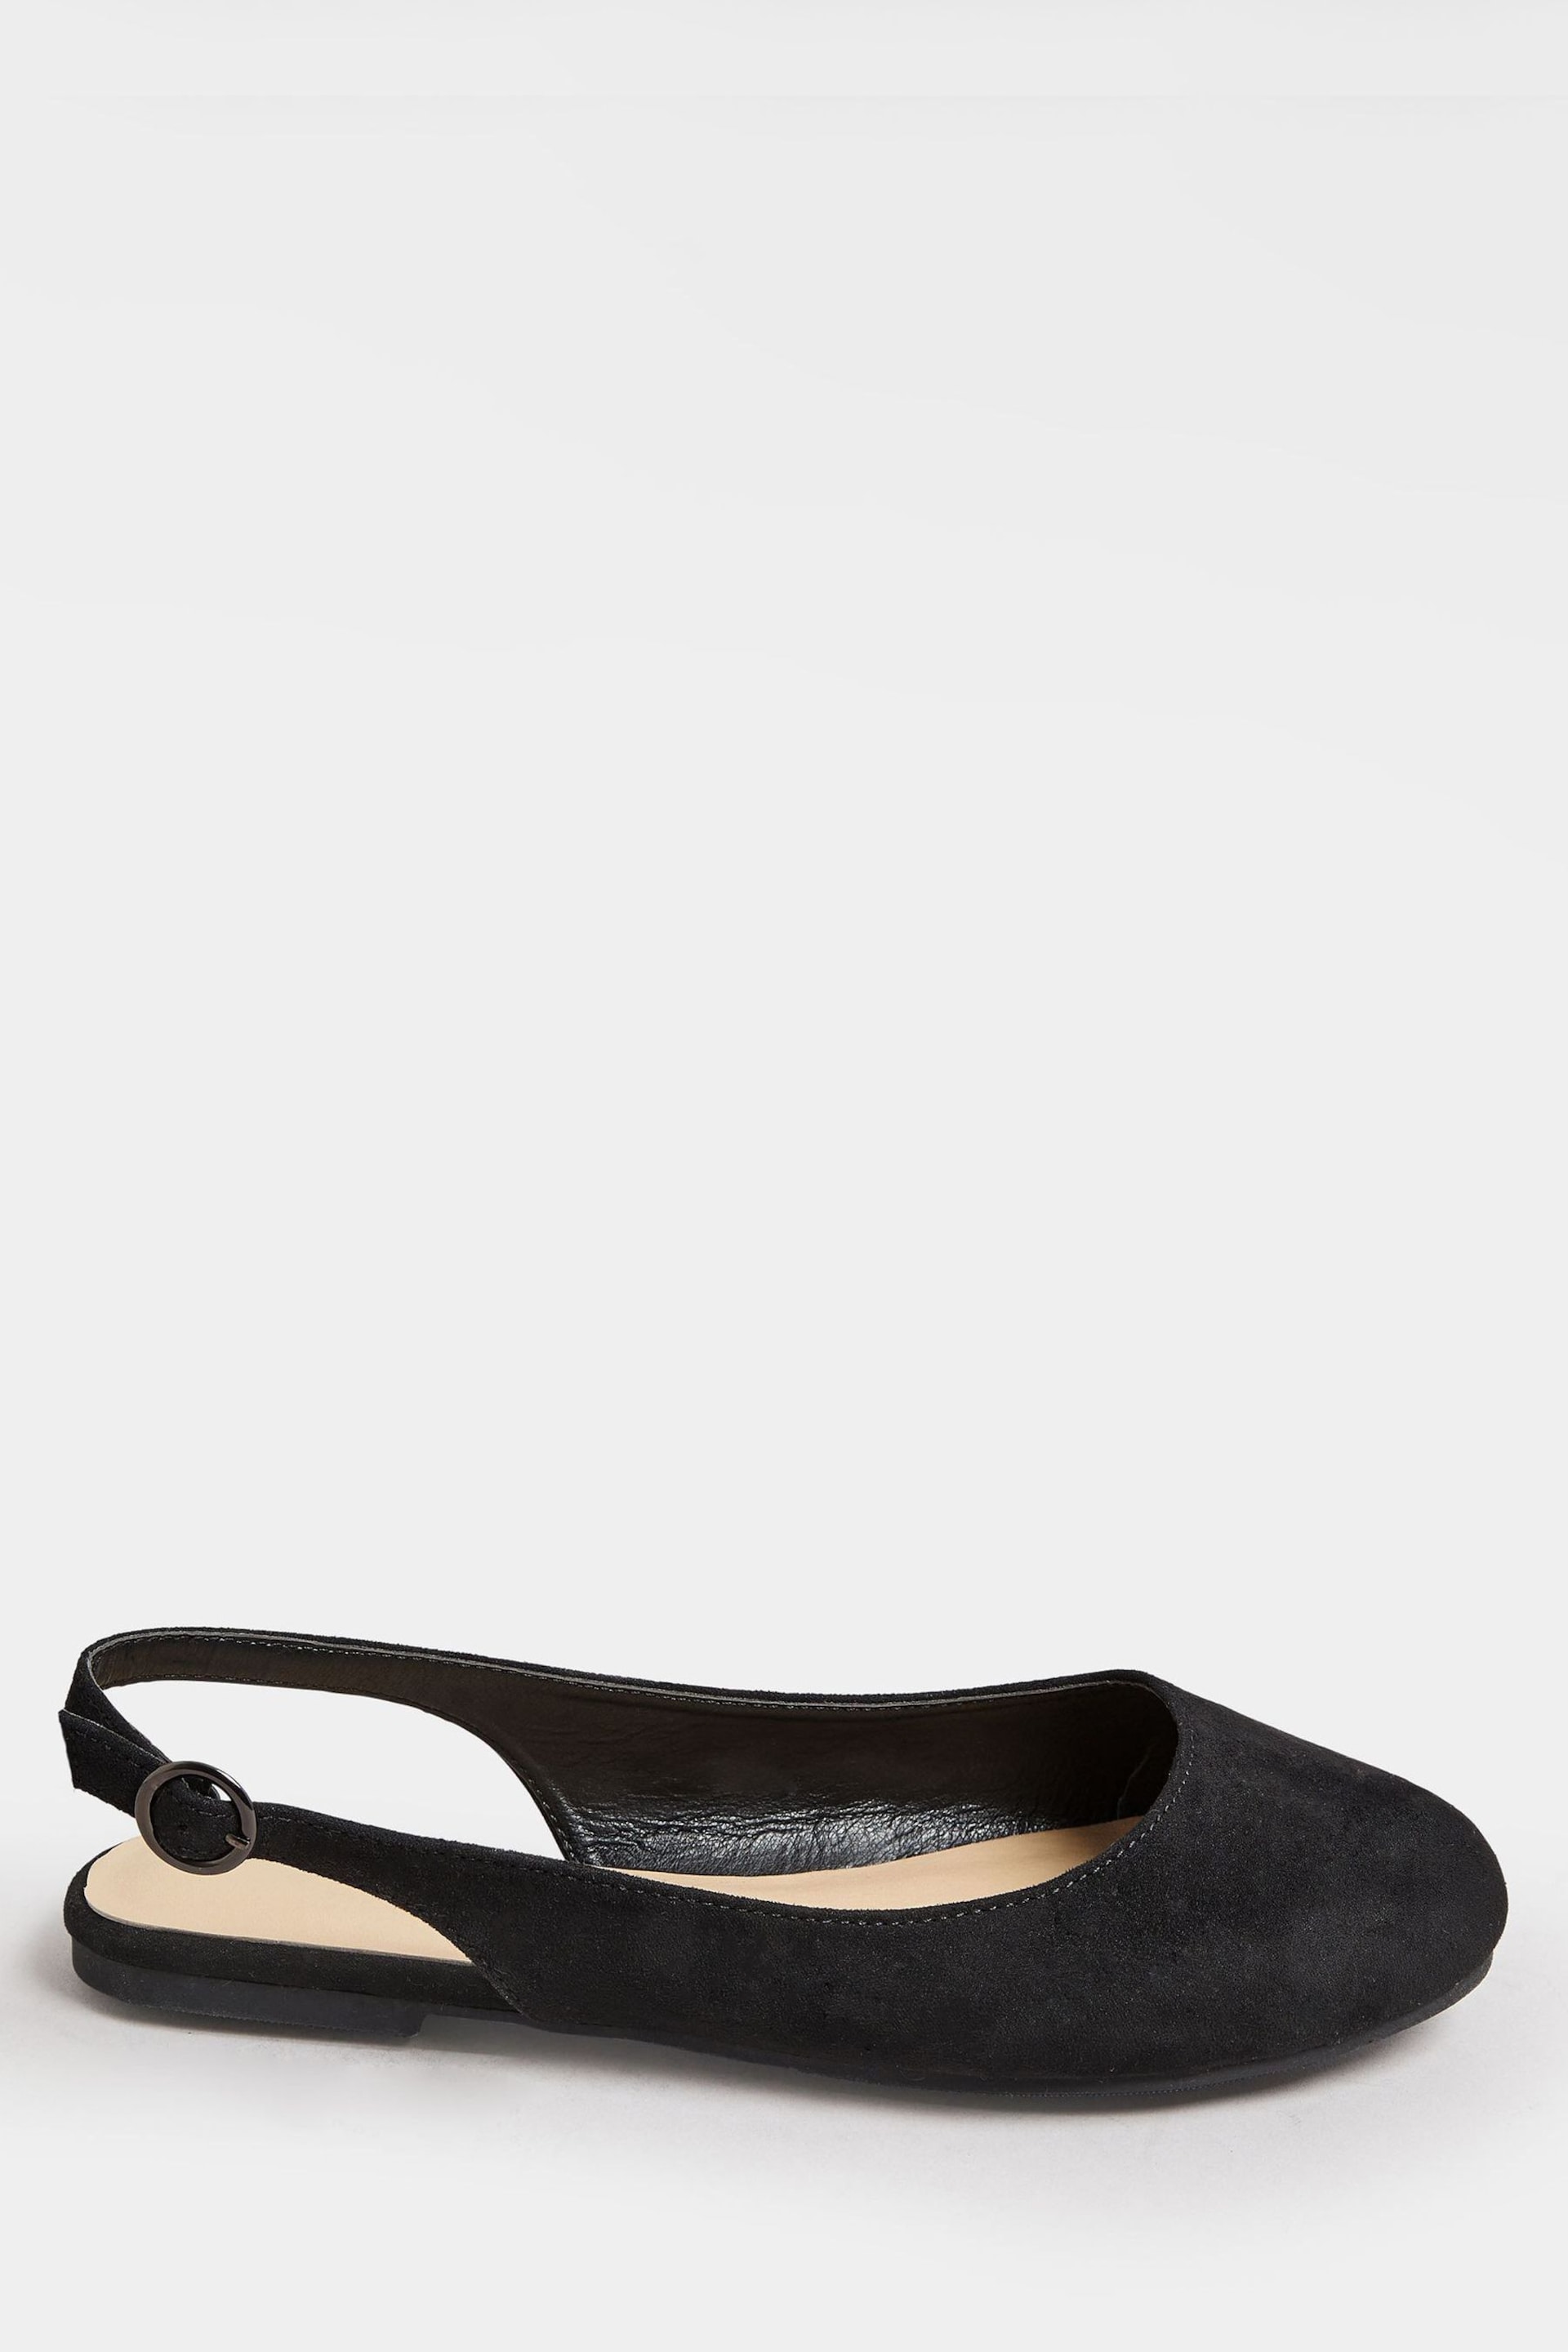 Yours Curve Black Faux Suede Slingback Pumps In Extra Wide EEE Fit - Image 3 of 5